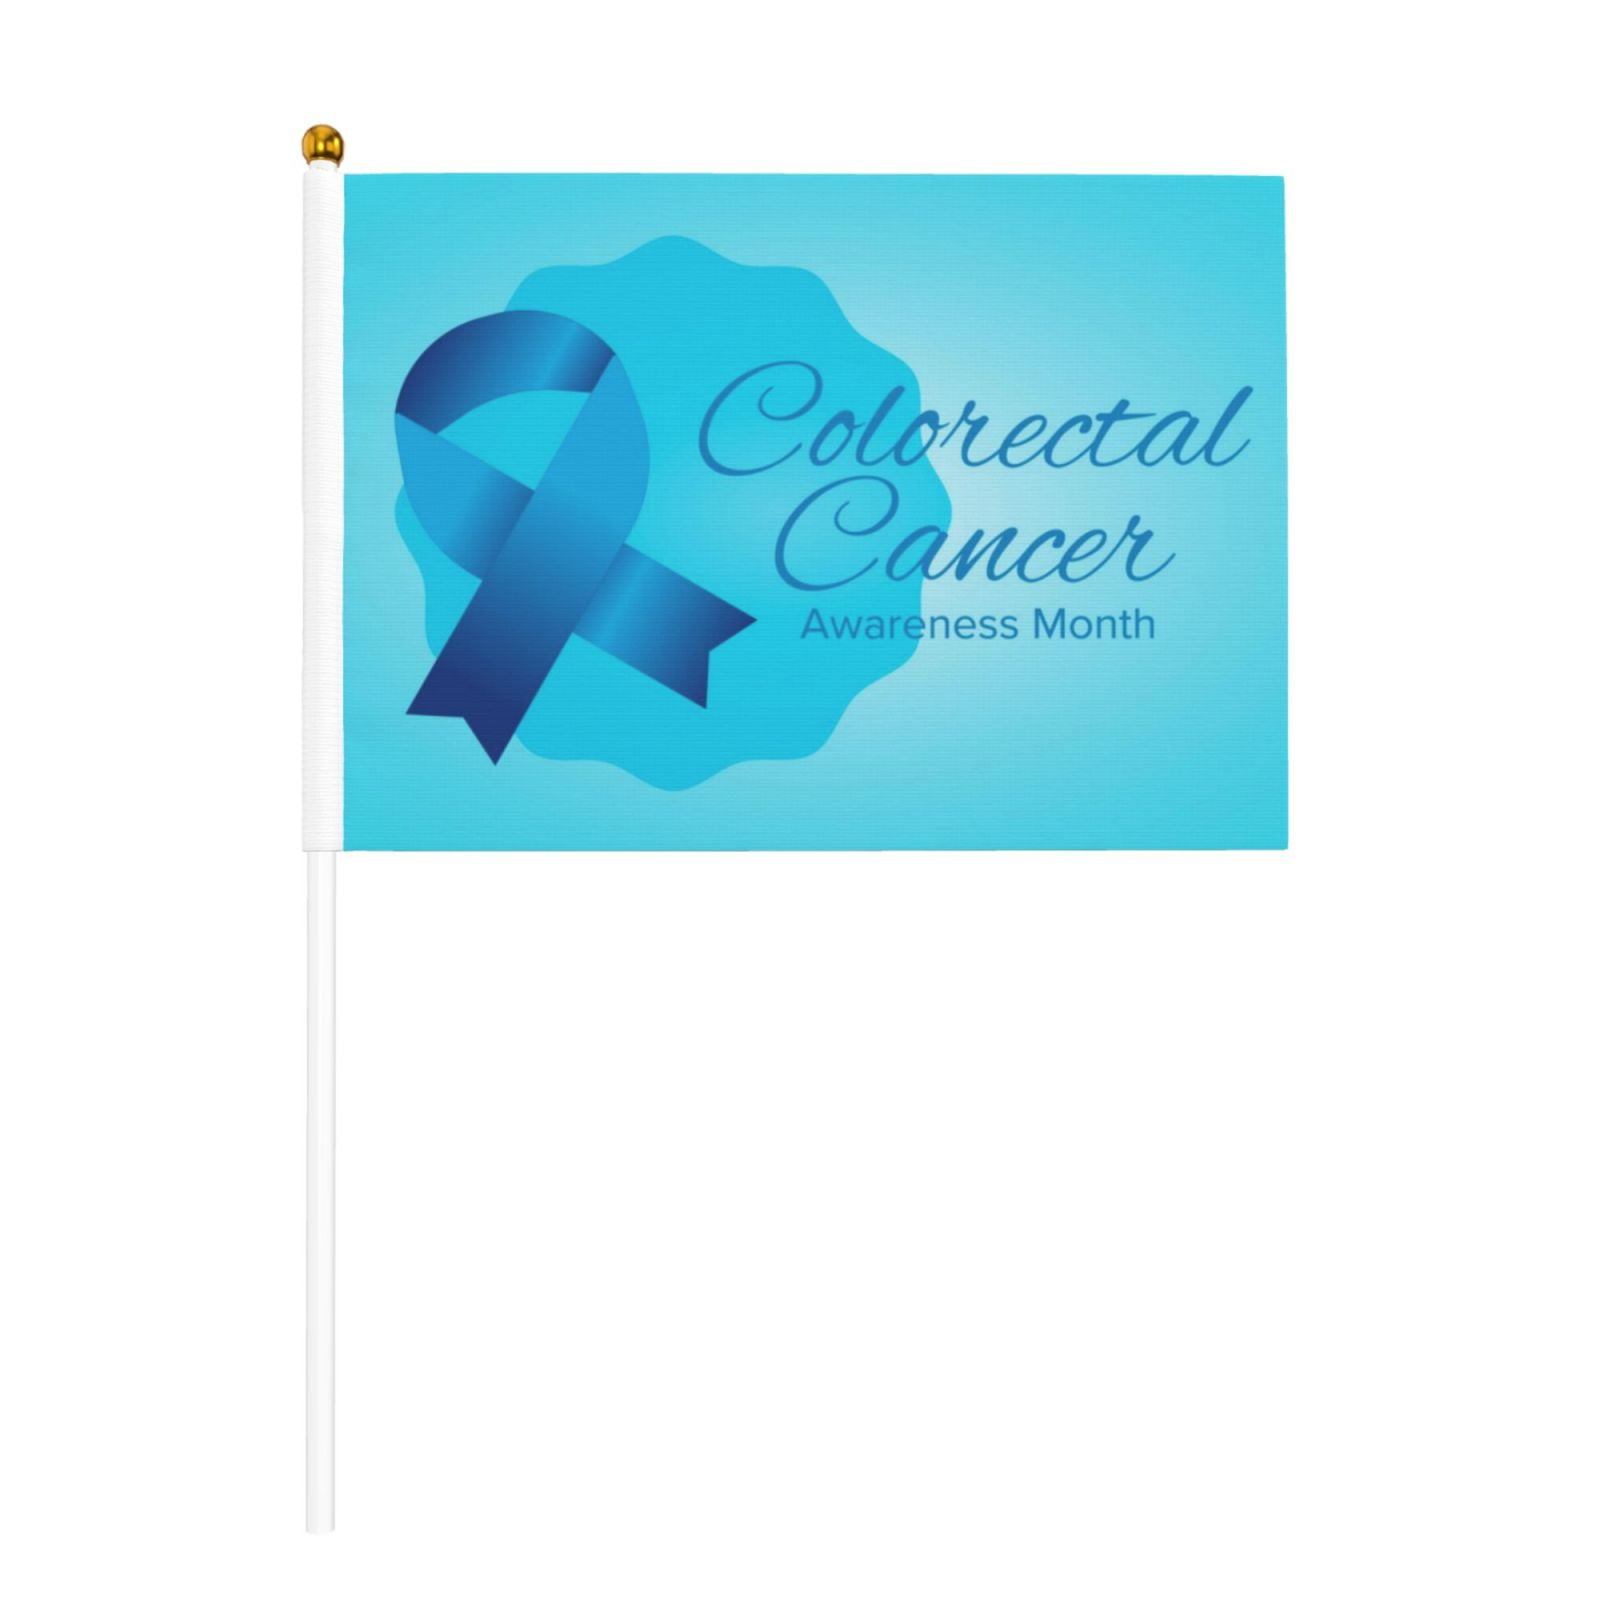 Colorectal Cancer Awareness Month Blue Ribbon Flags 6 Packs Mini ...